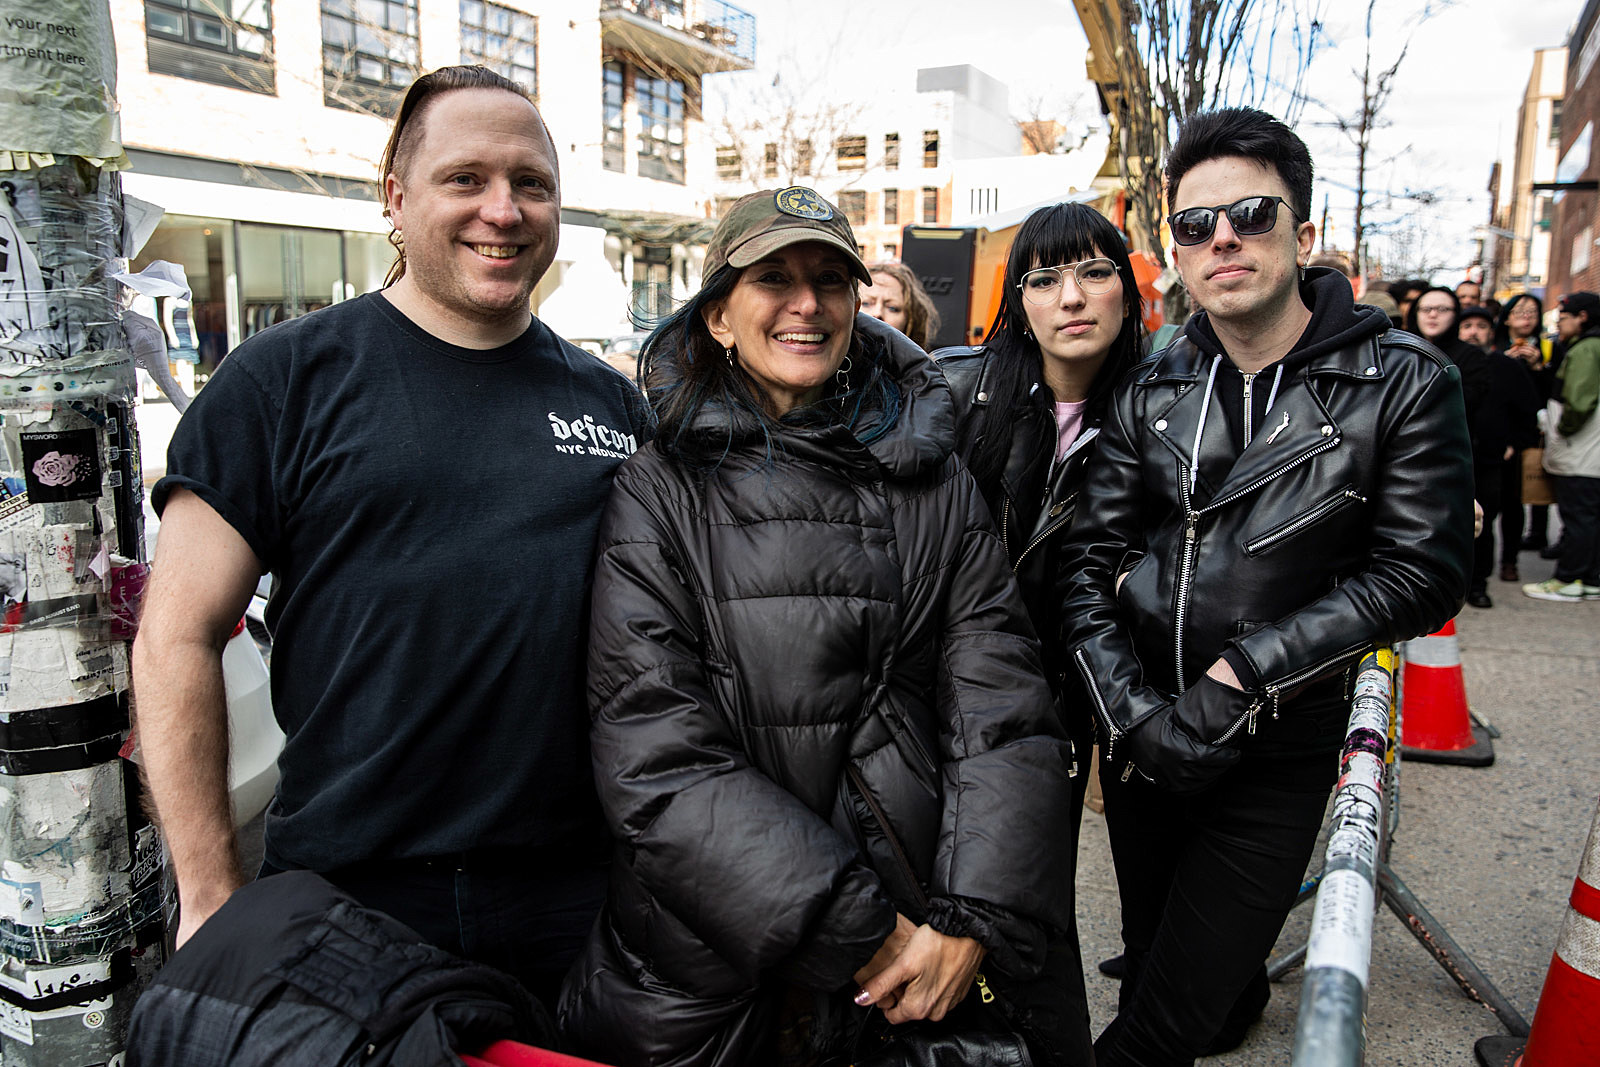 Industrial Accident: The Story of Wax Trax! Records Experience at Music Hall of Williamsburg